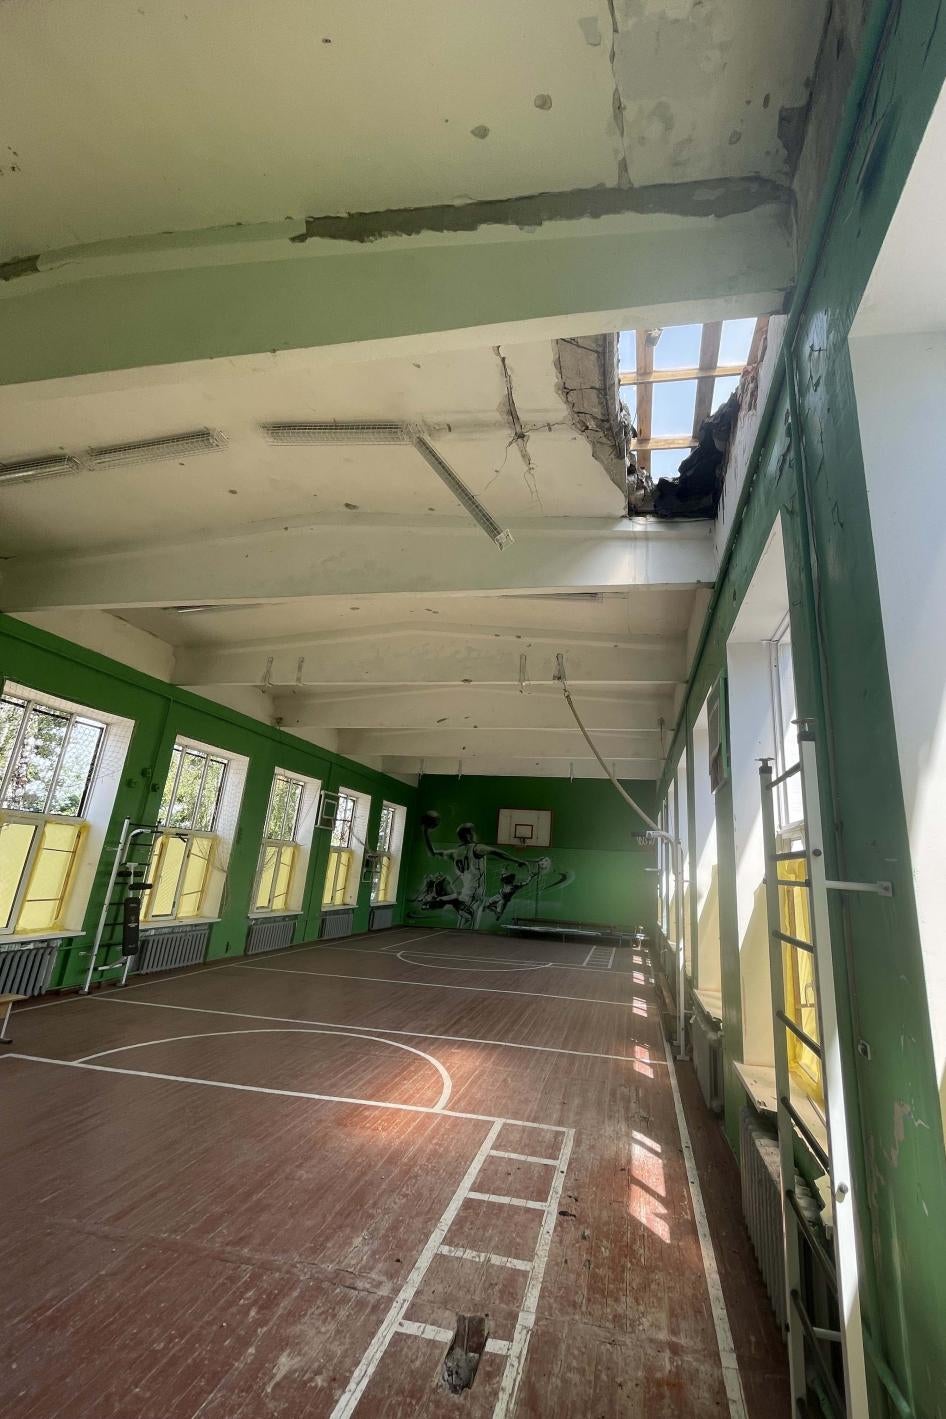 A damaged gymnasium with a hole in the roof